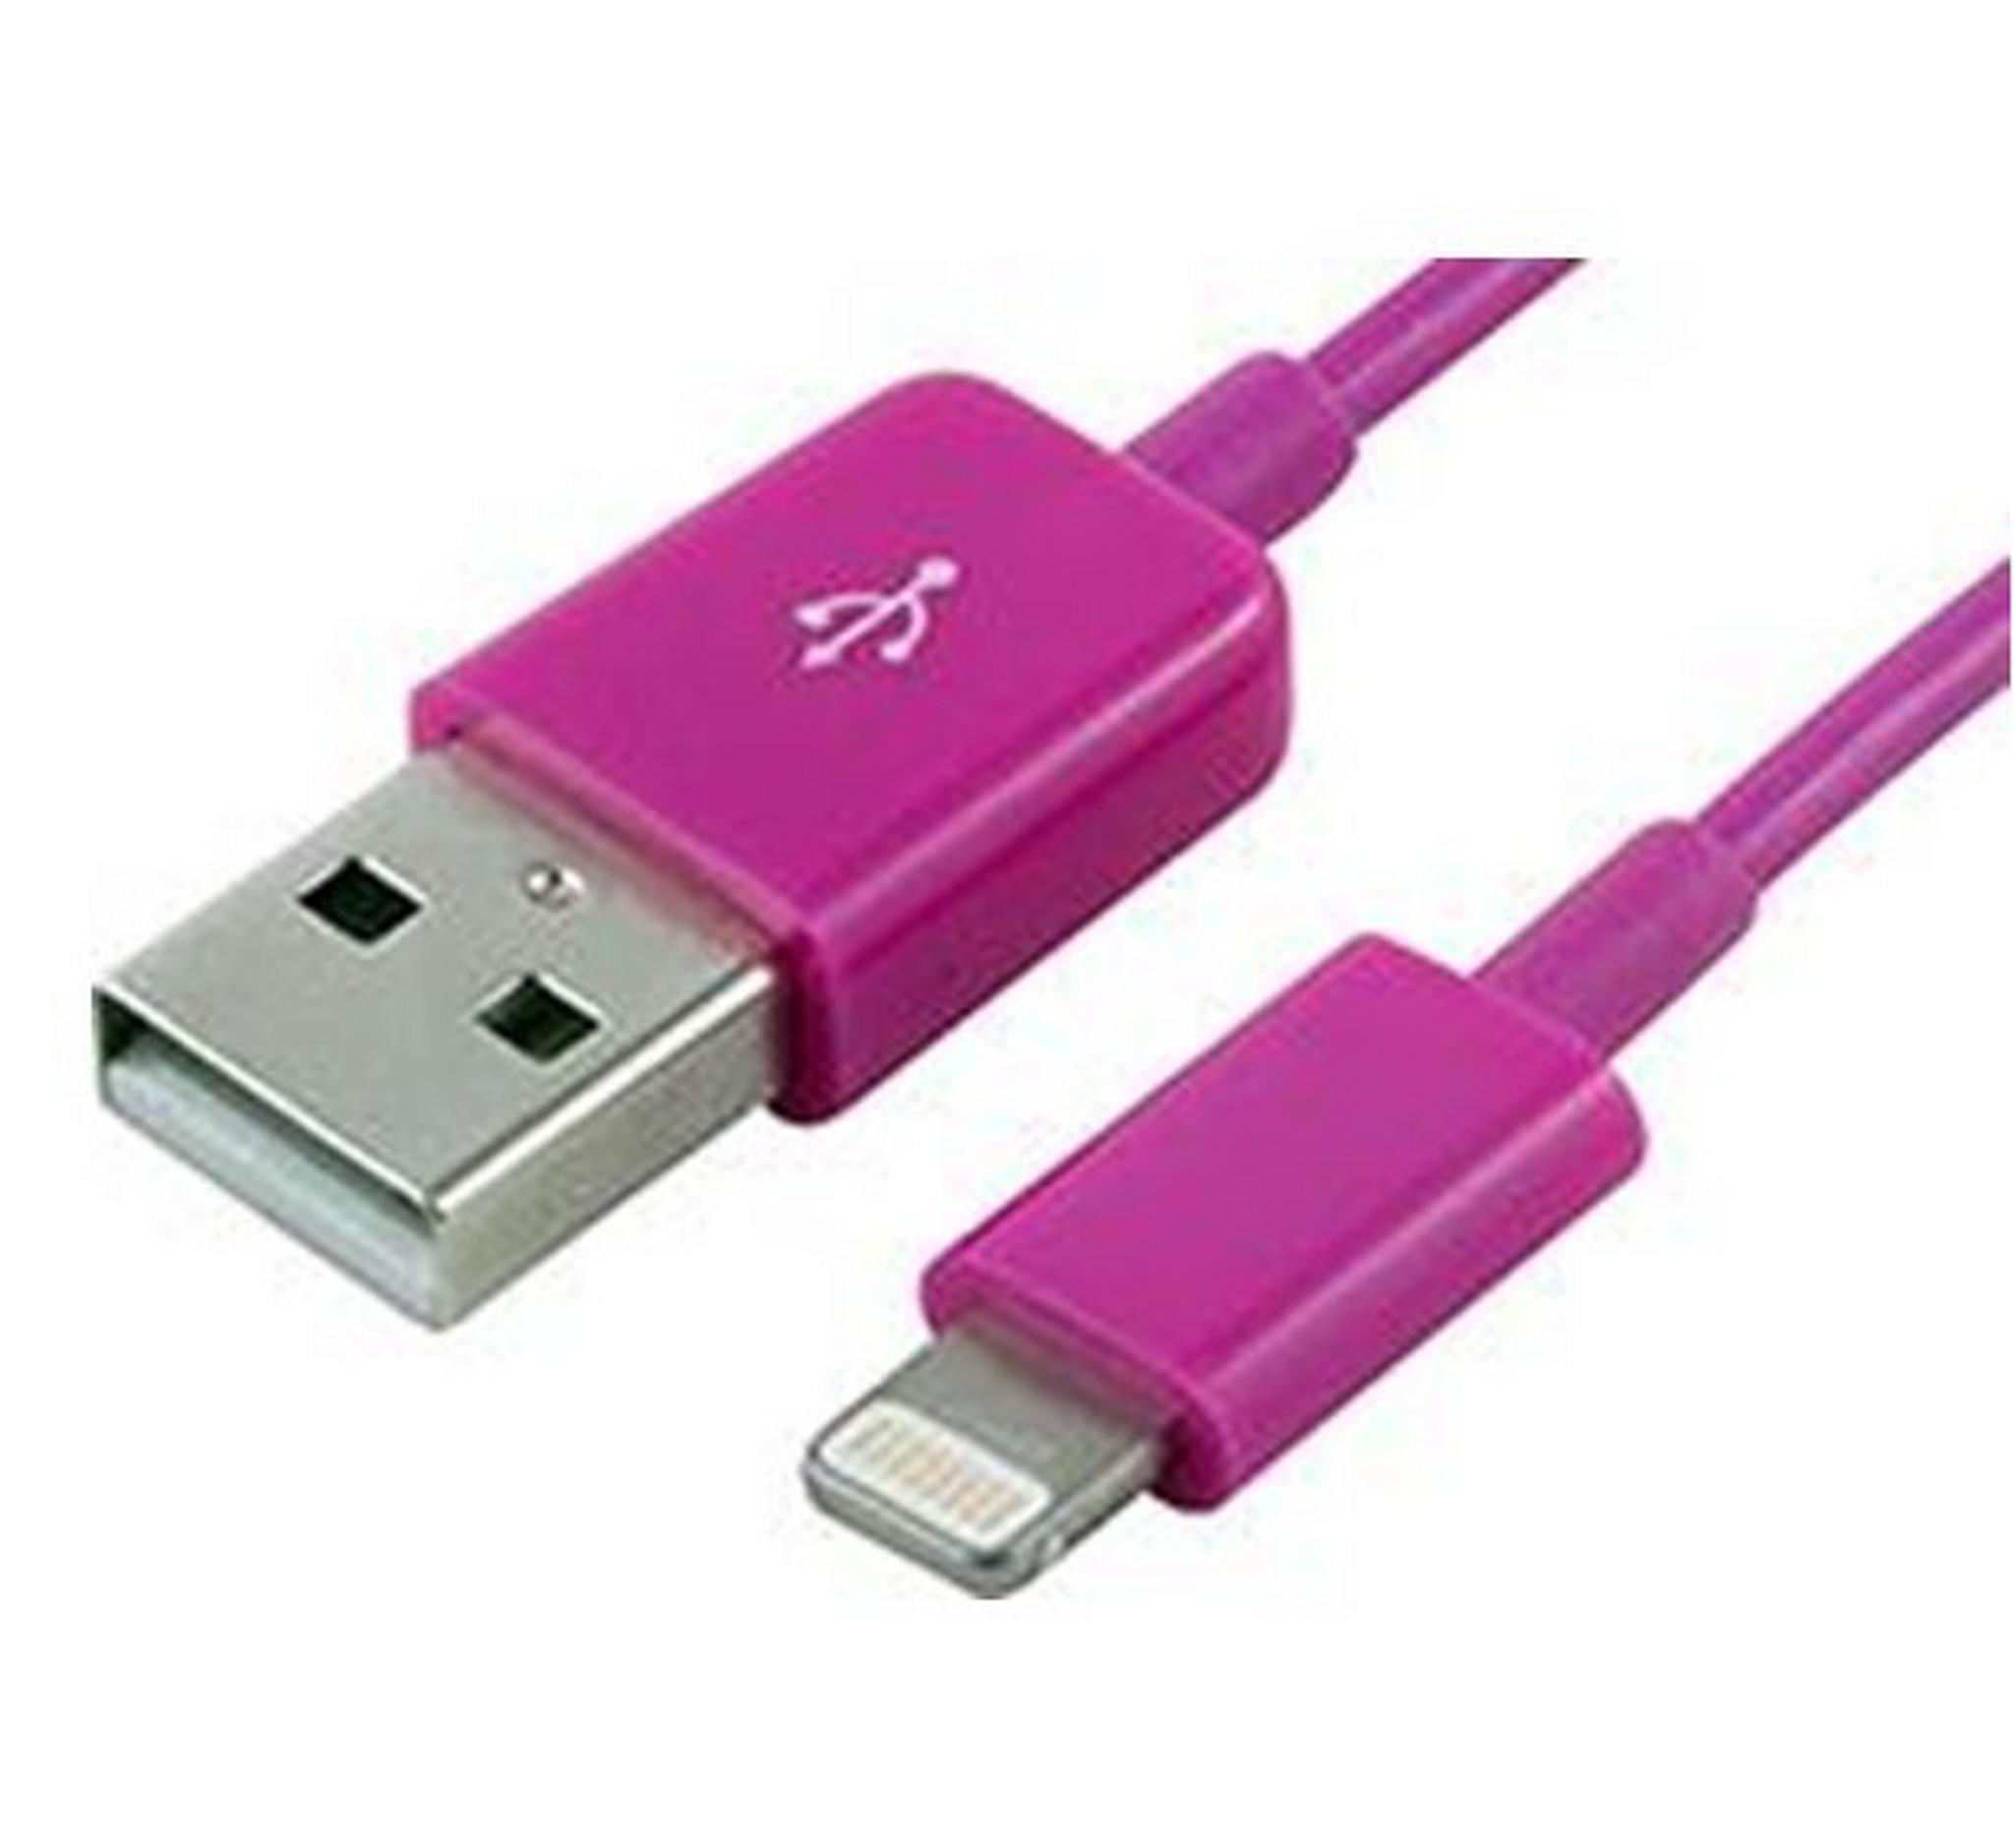 Patriot PCALC3FTFPK Lightning Cable 1 Meter - Pink